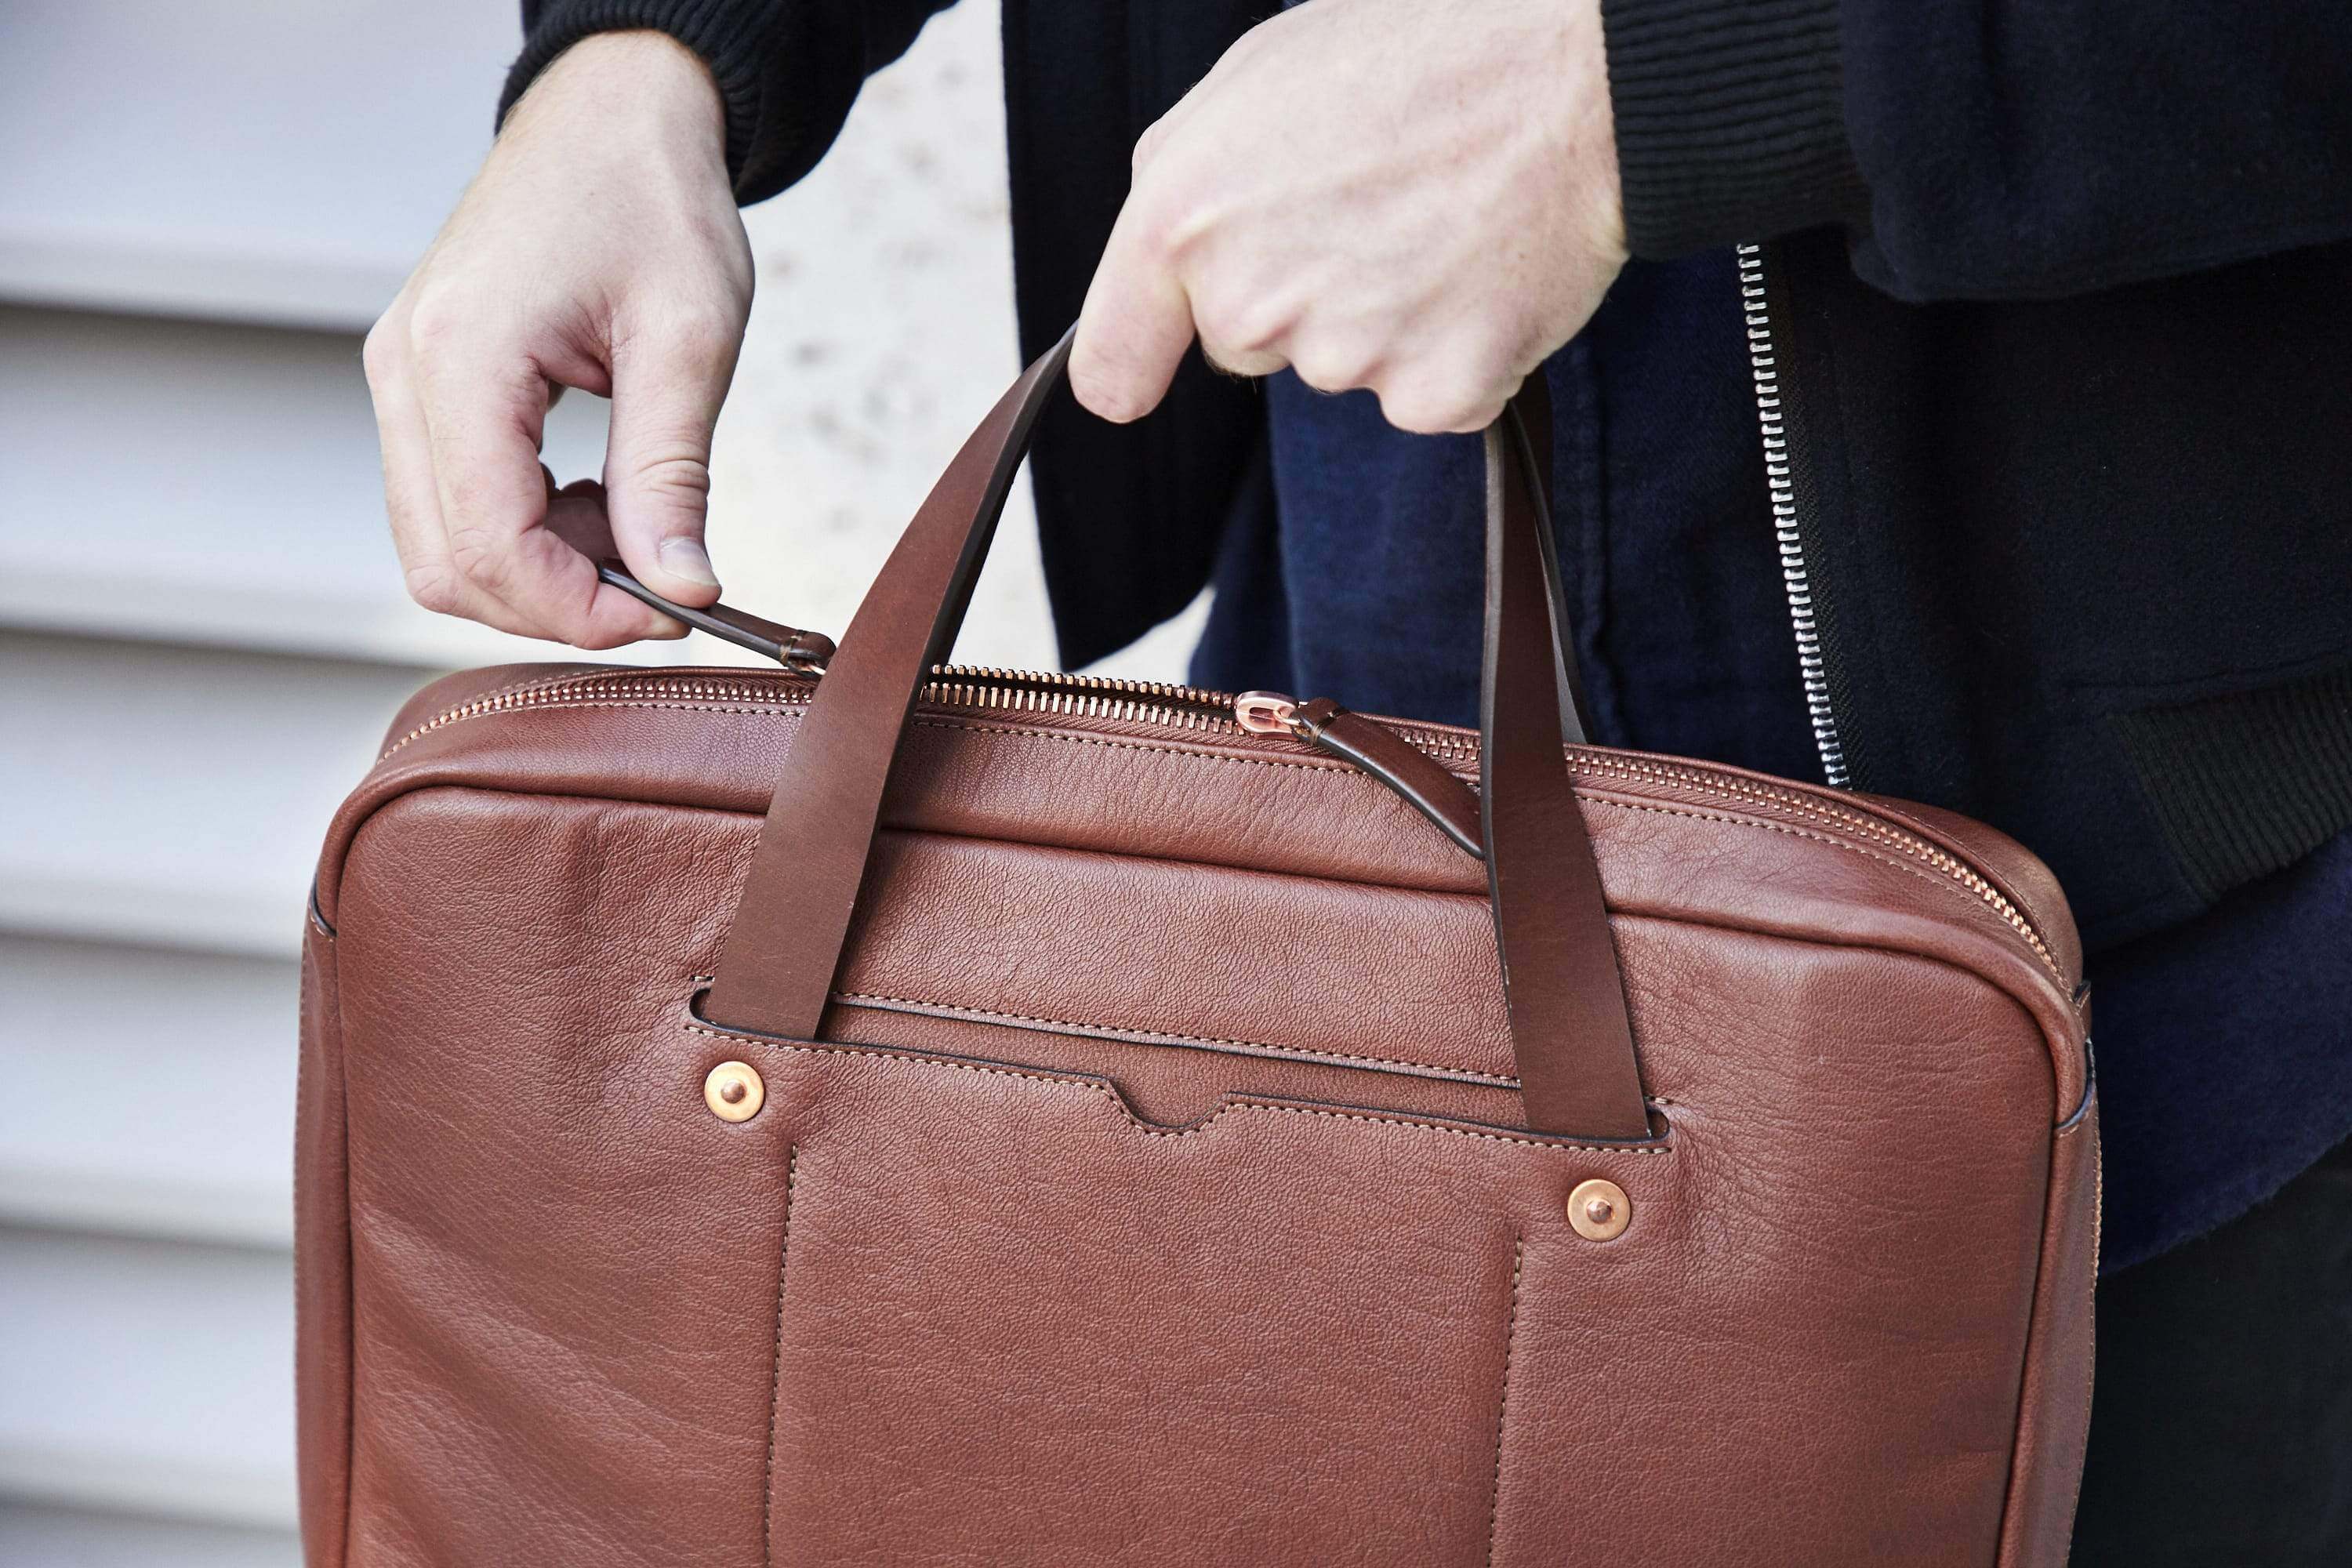 Update your business style with a brand new leather laptop bag